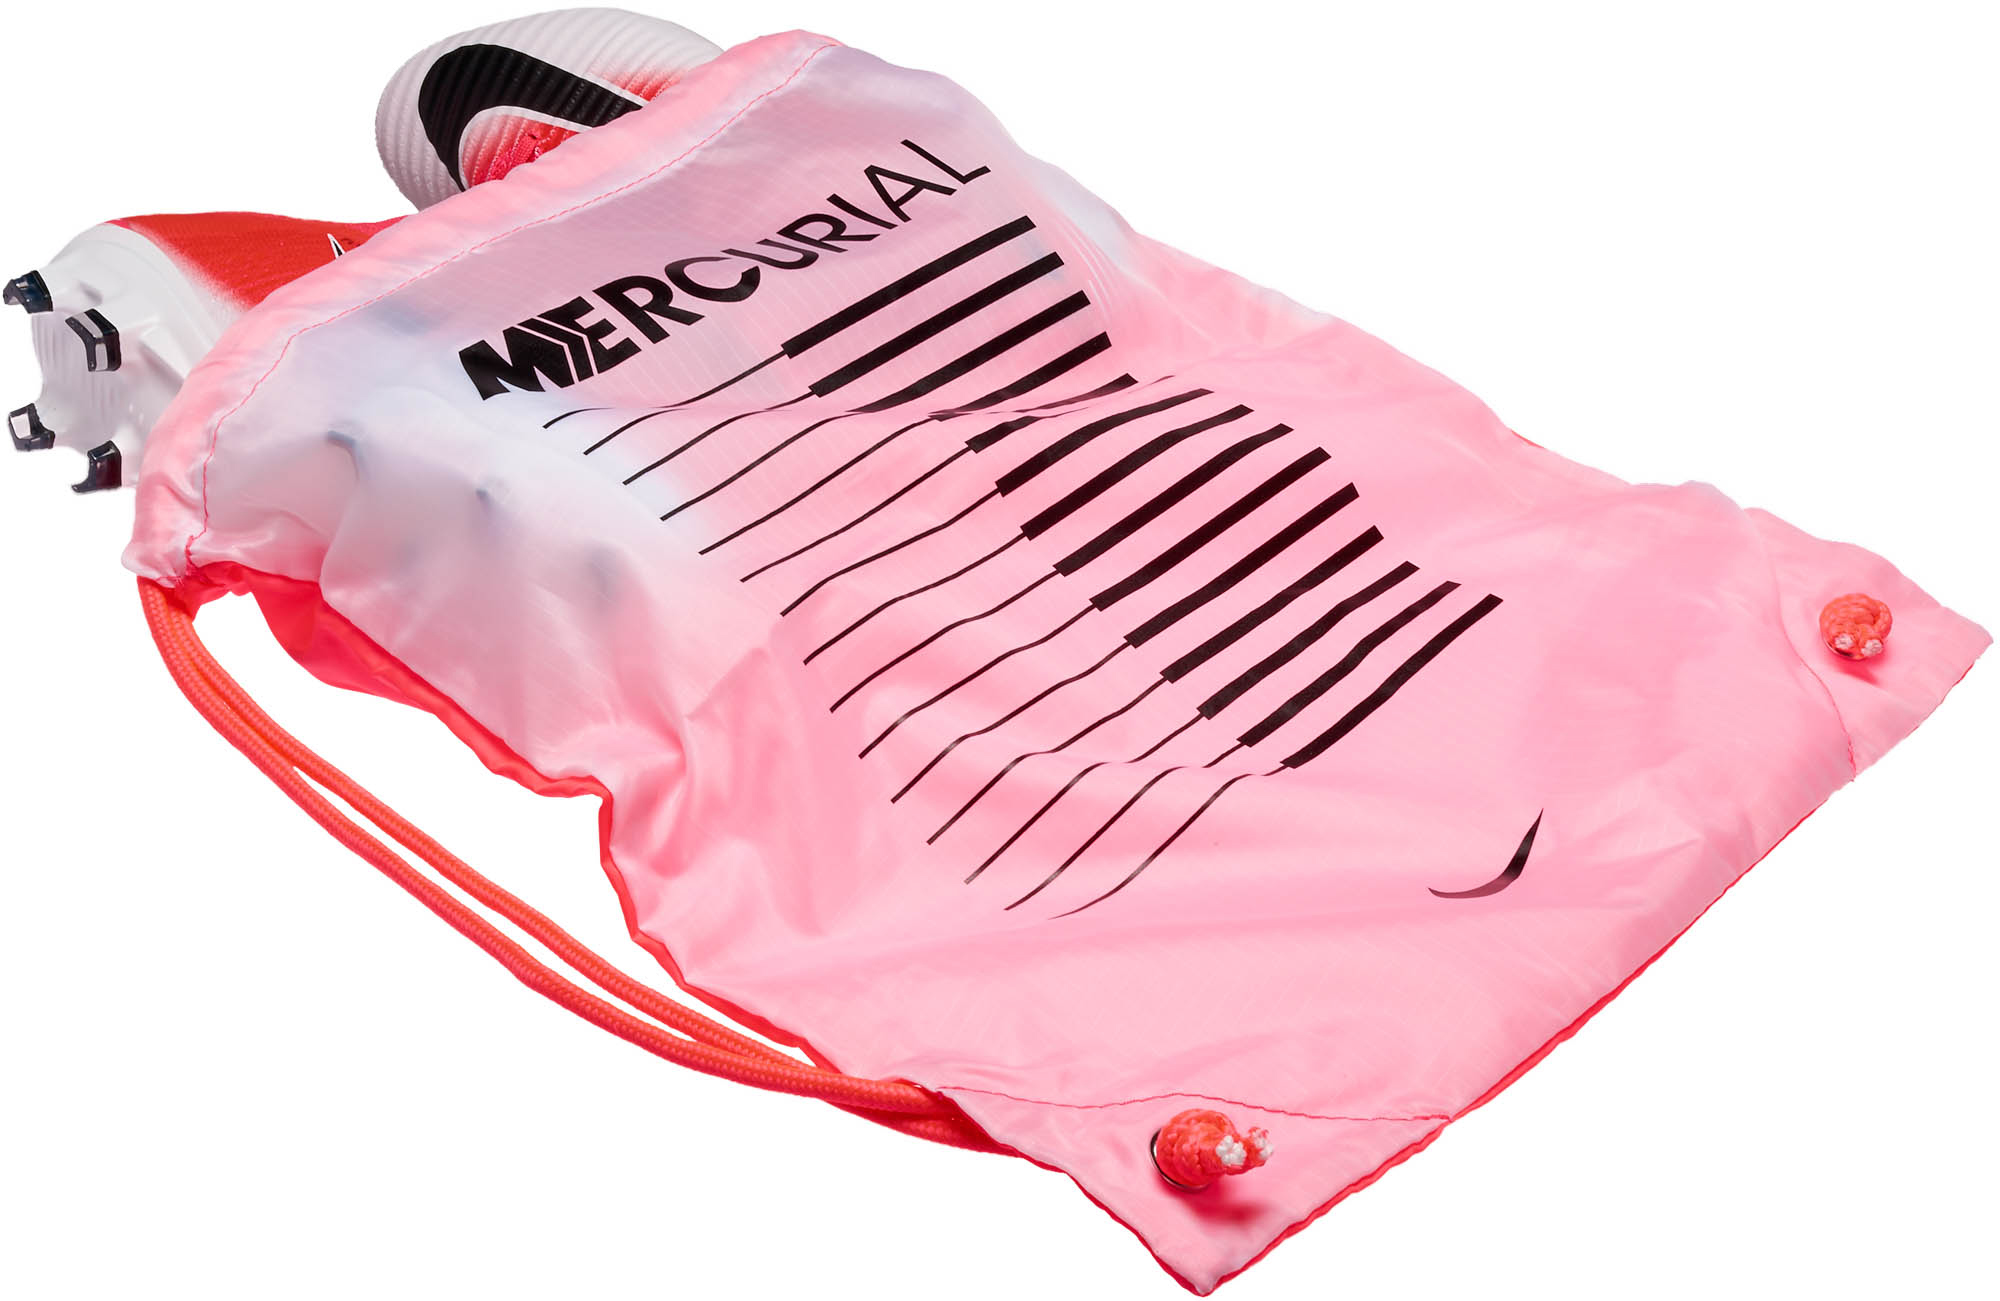 nike mercurial superfly v pink and white